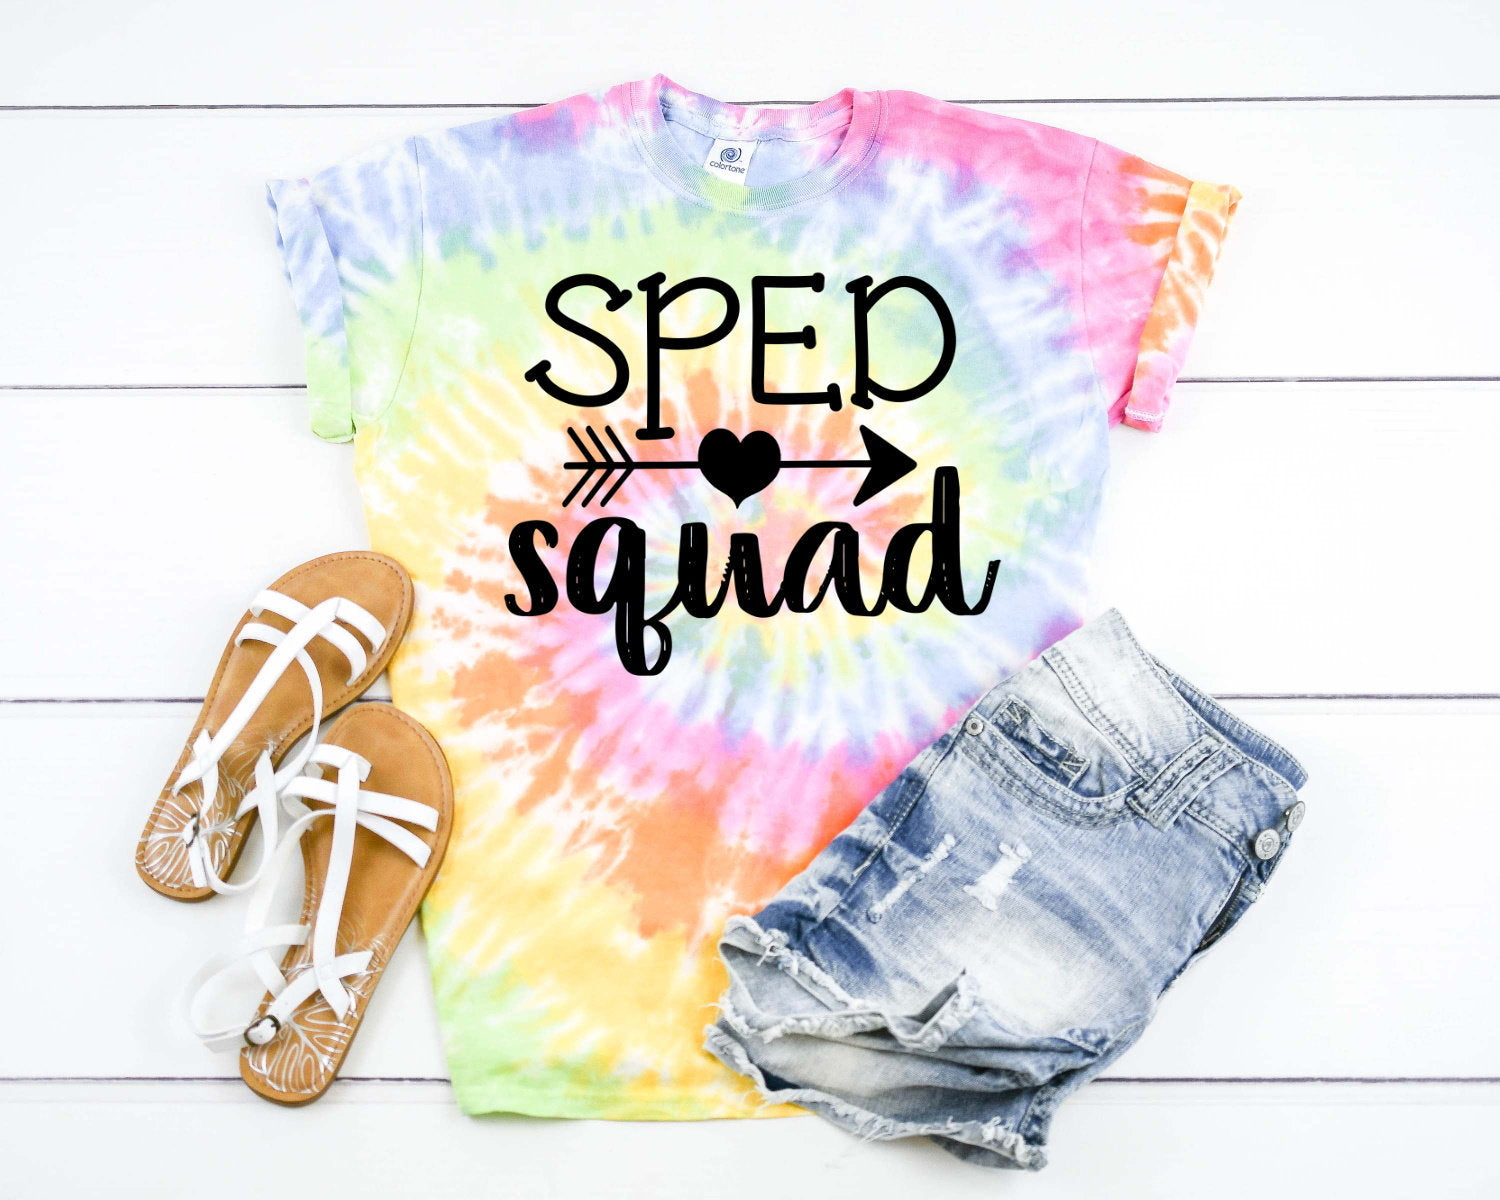 Sped Squad Back To School Special Education Teacher Tie Dye Graphic Tee T-Shirt